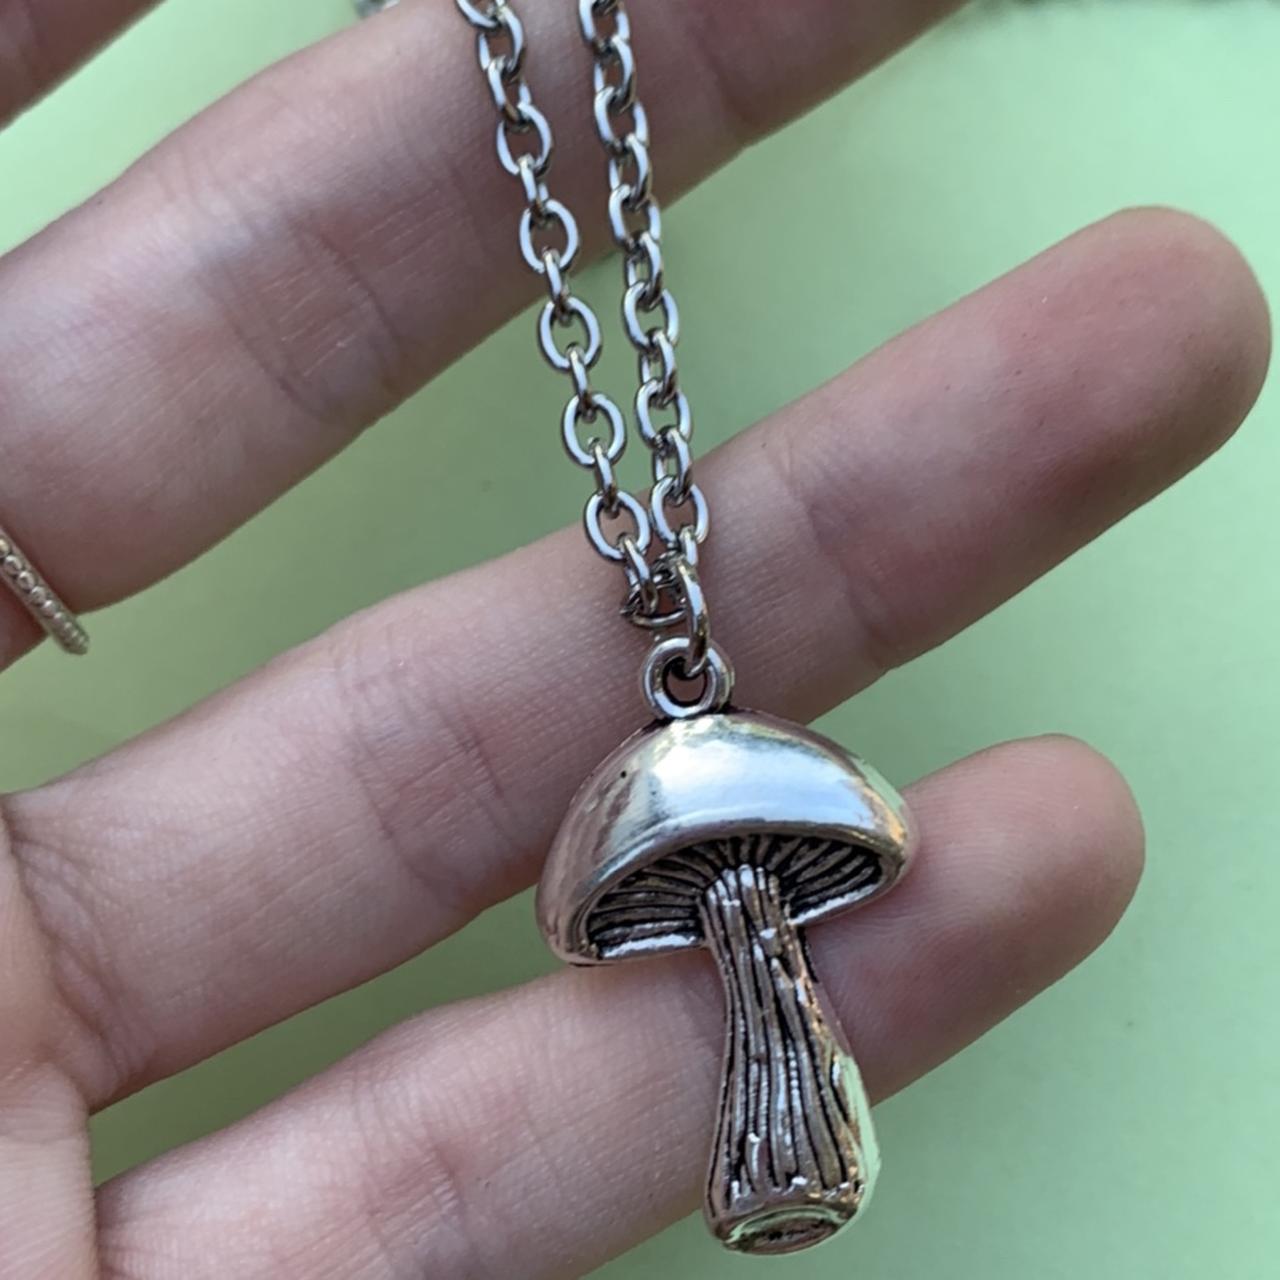 The mushroom ball chain necklace